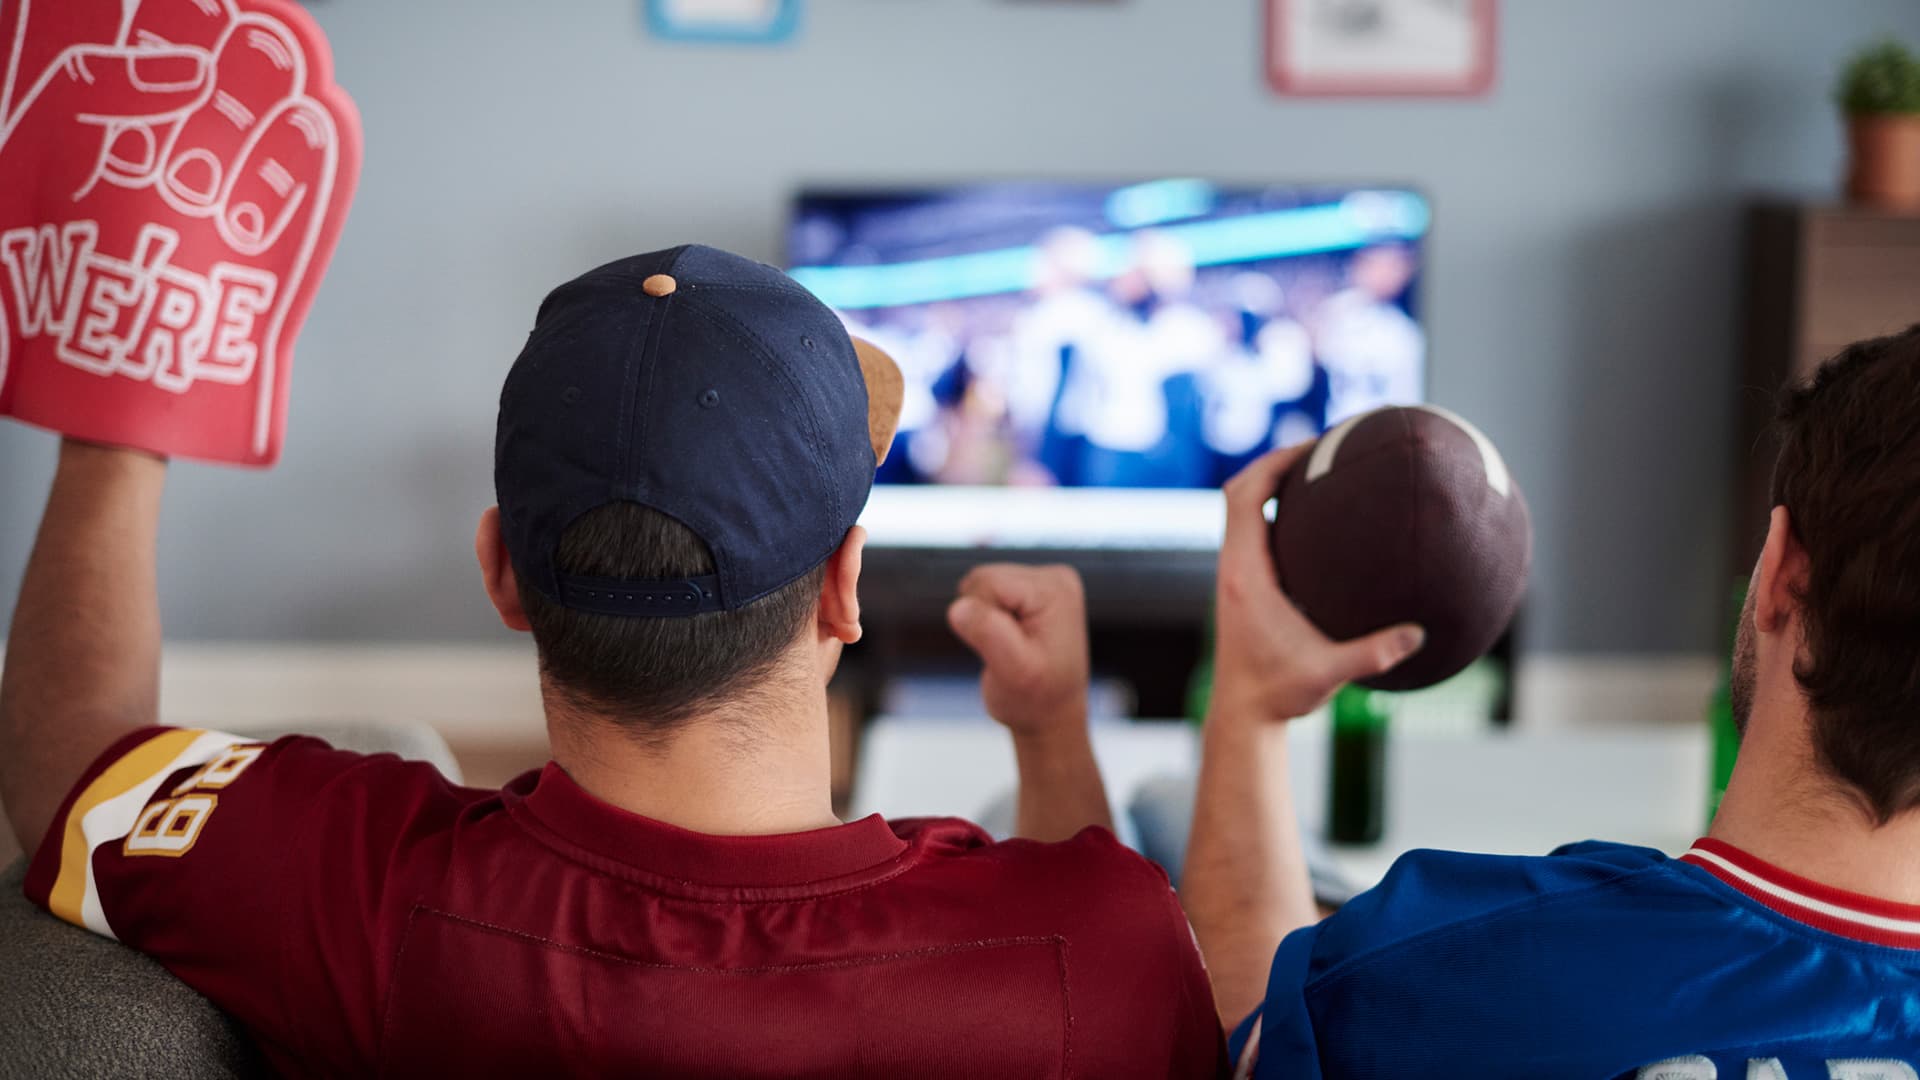 The Best Sports Streaming Services for Cord Cutters